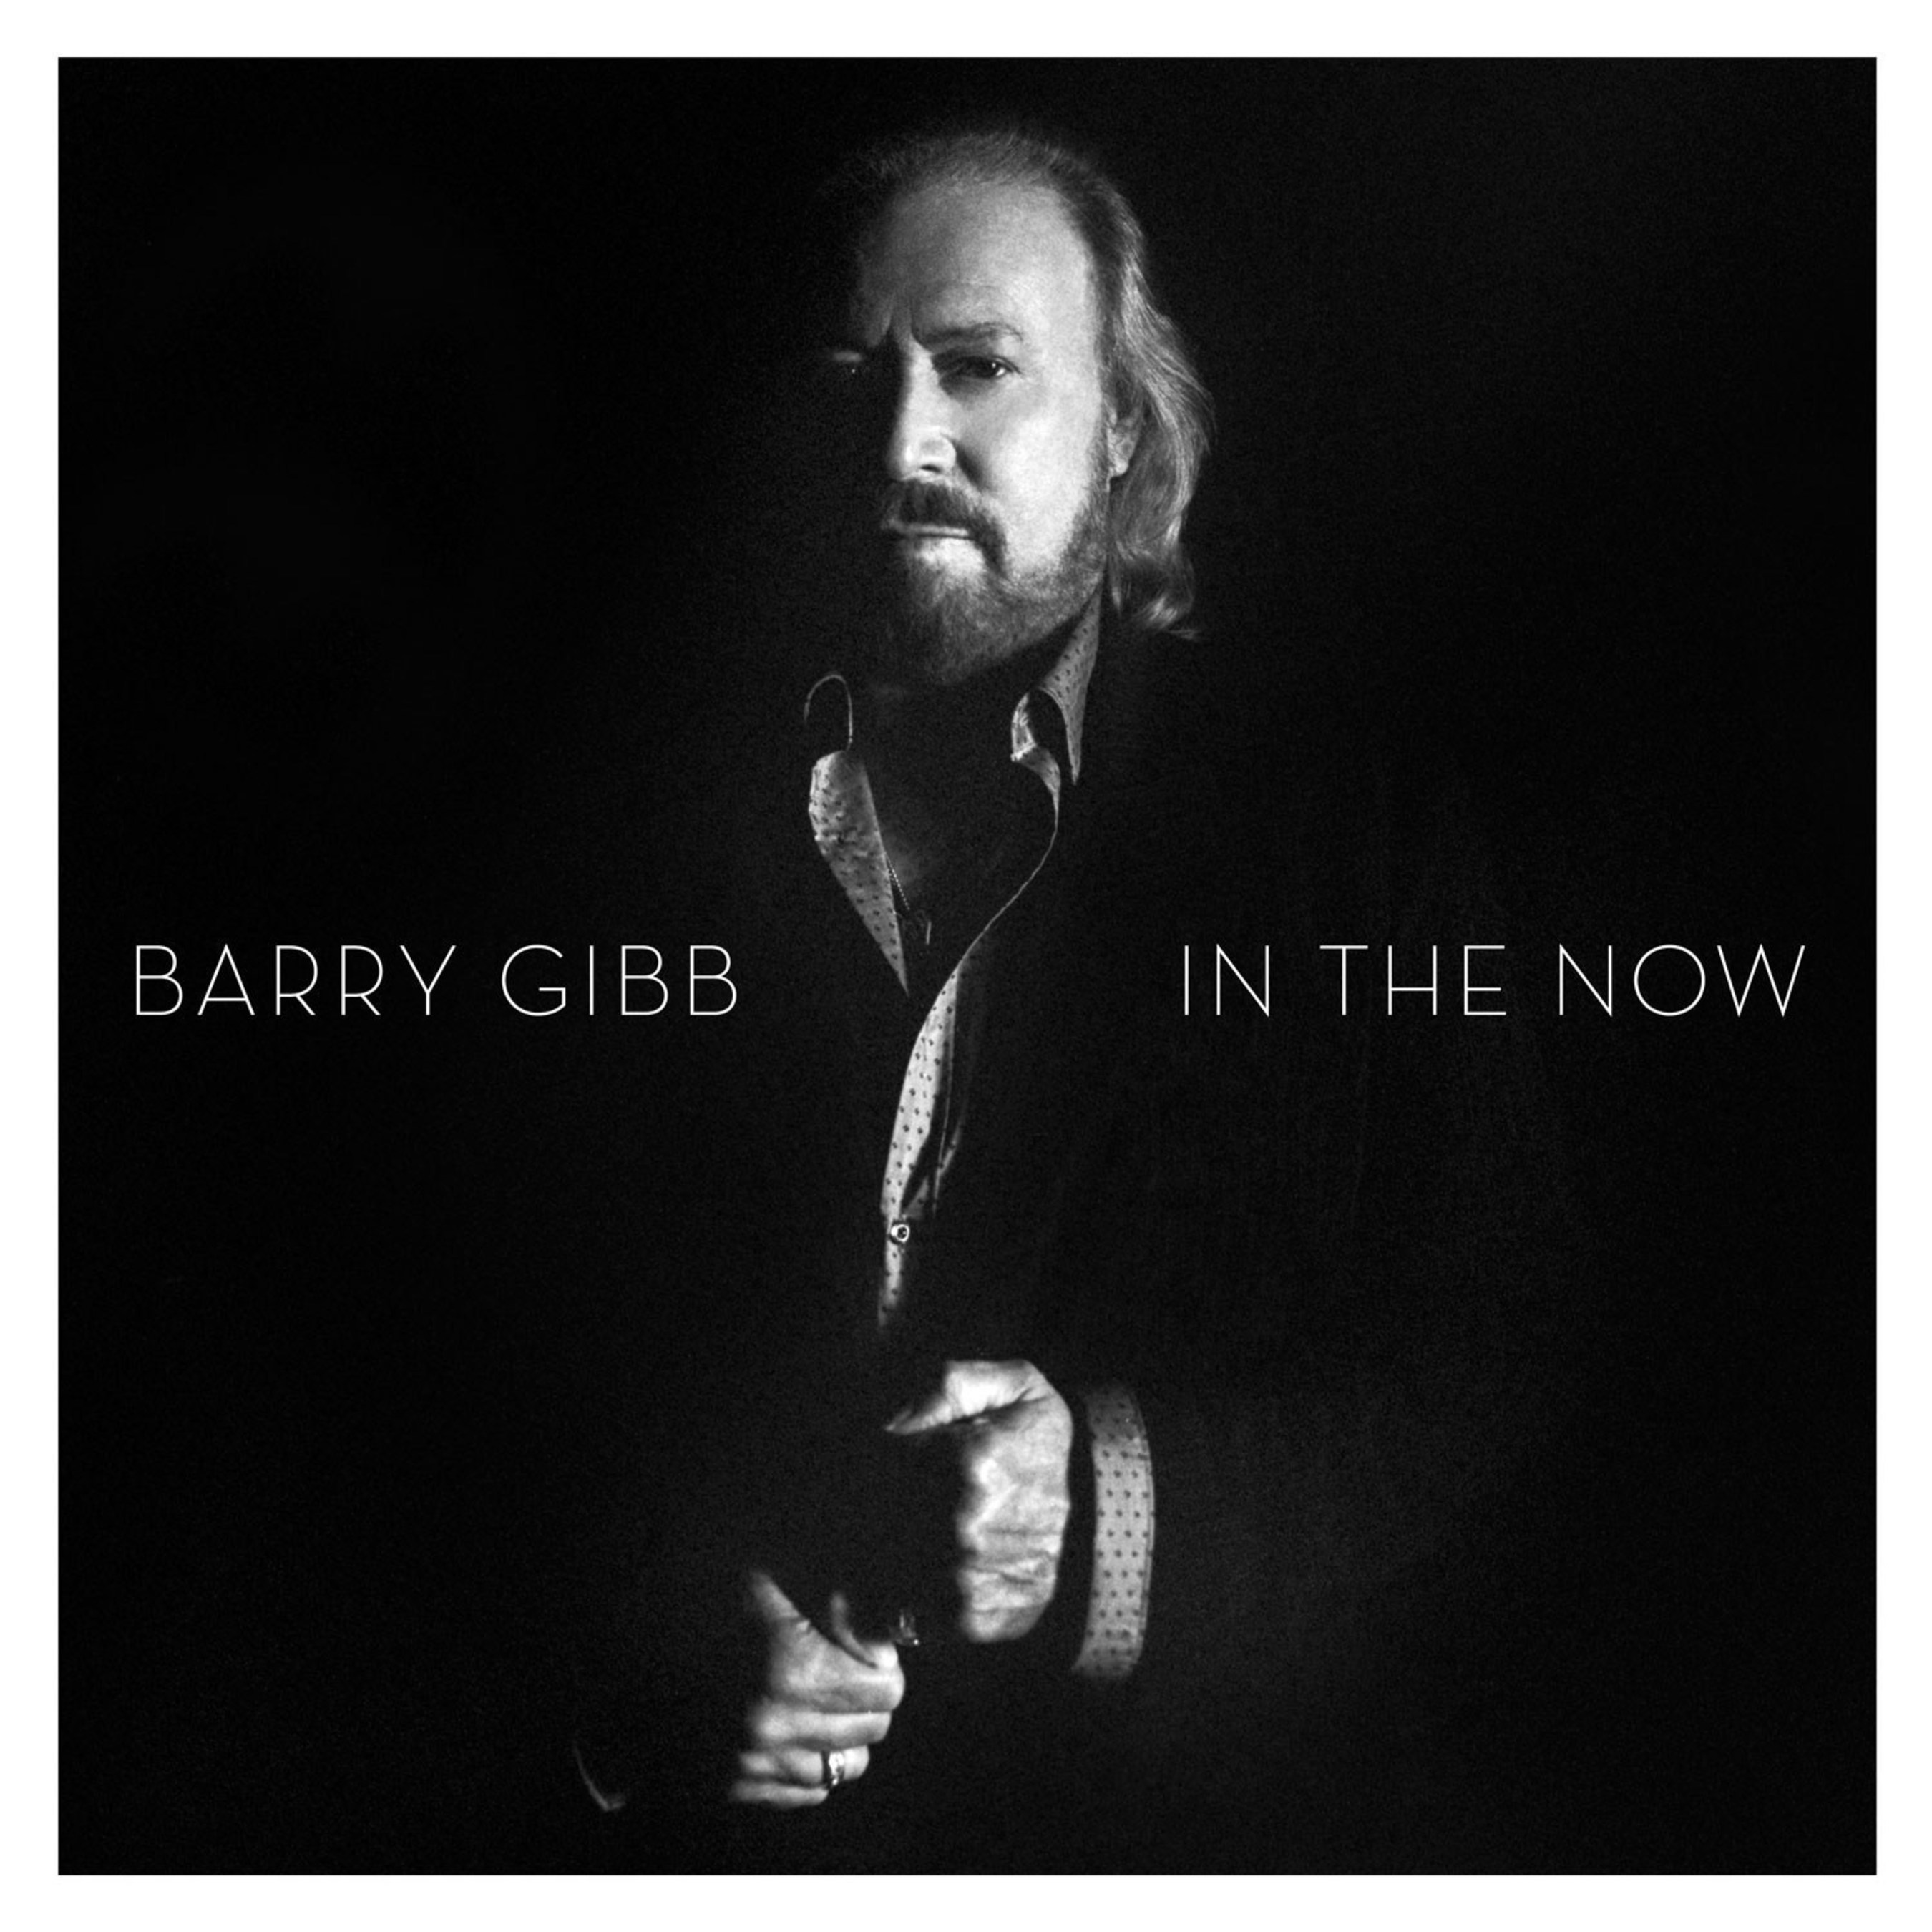 Columbia Records Announces Legendary Singer/Songwriter/Producer Barry Gibb To Release First Solo Album Involving New Material 'In The Now' On October 7; Available For Pre-Order Today